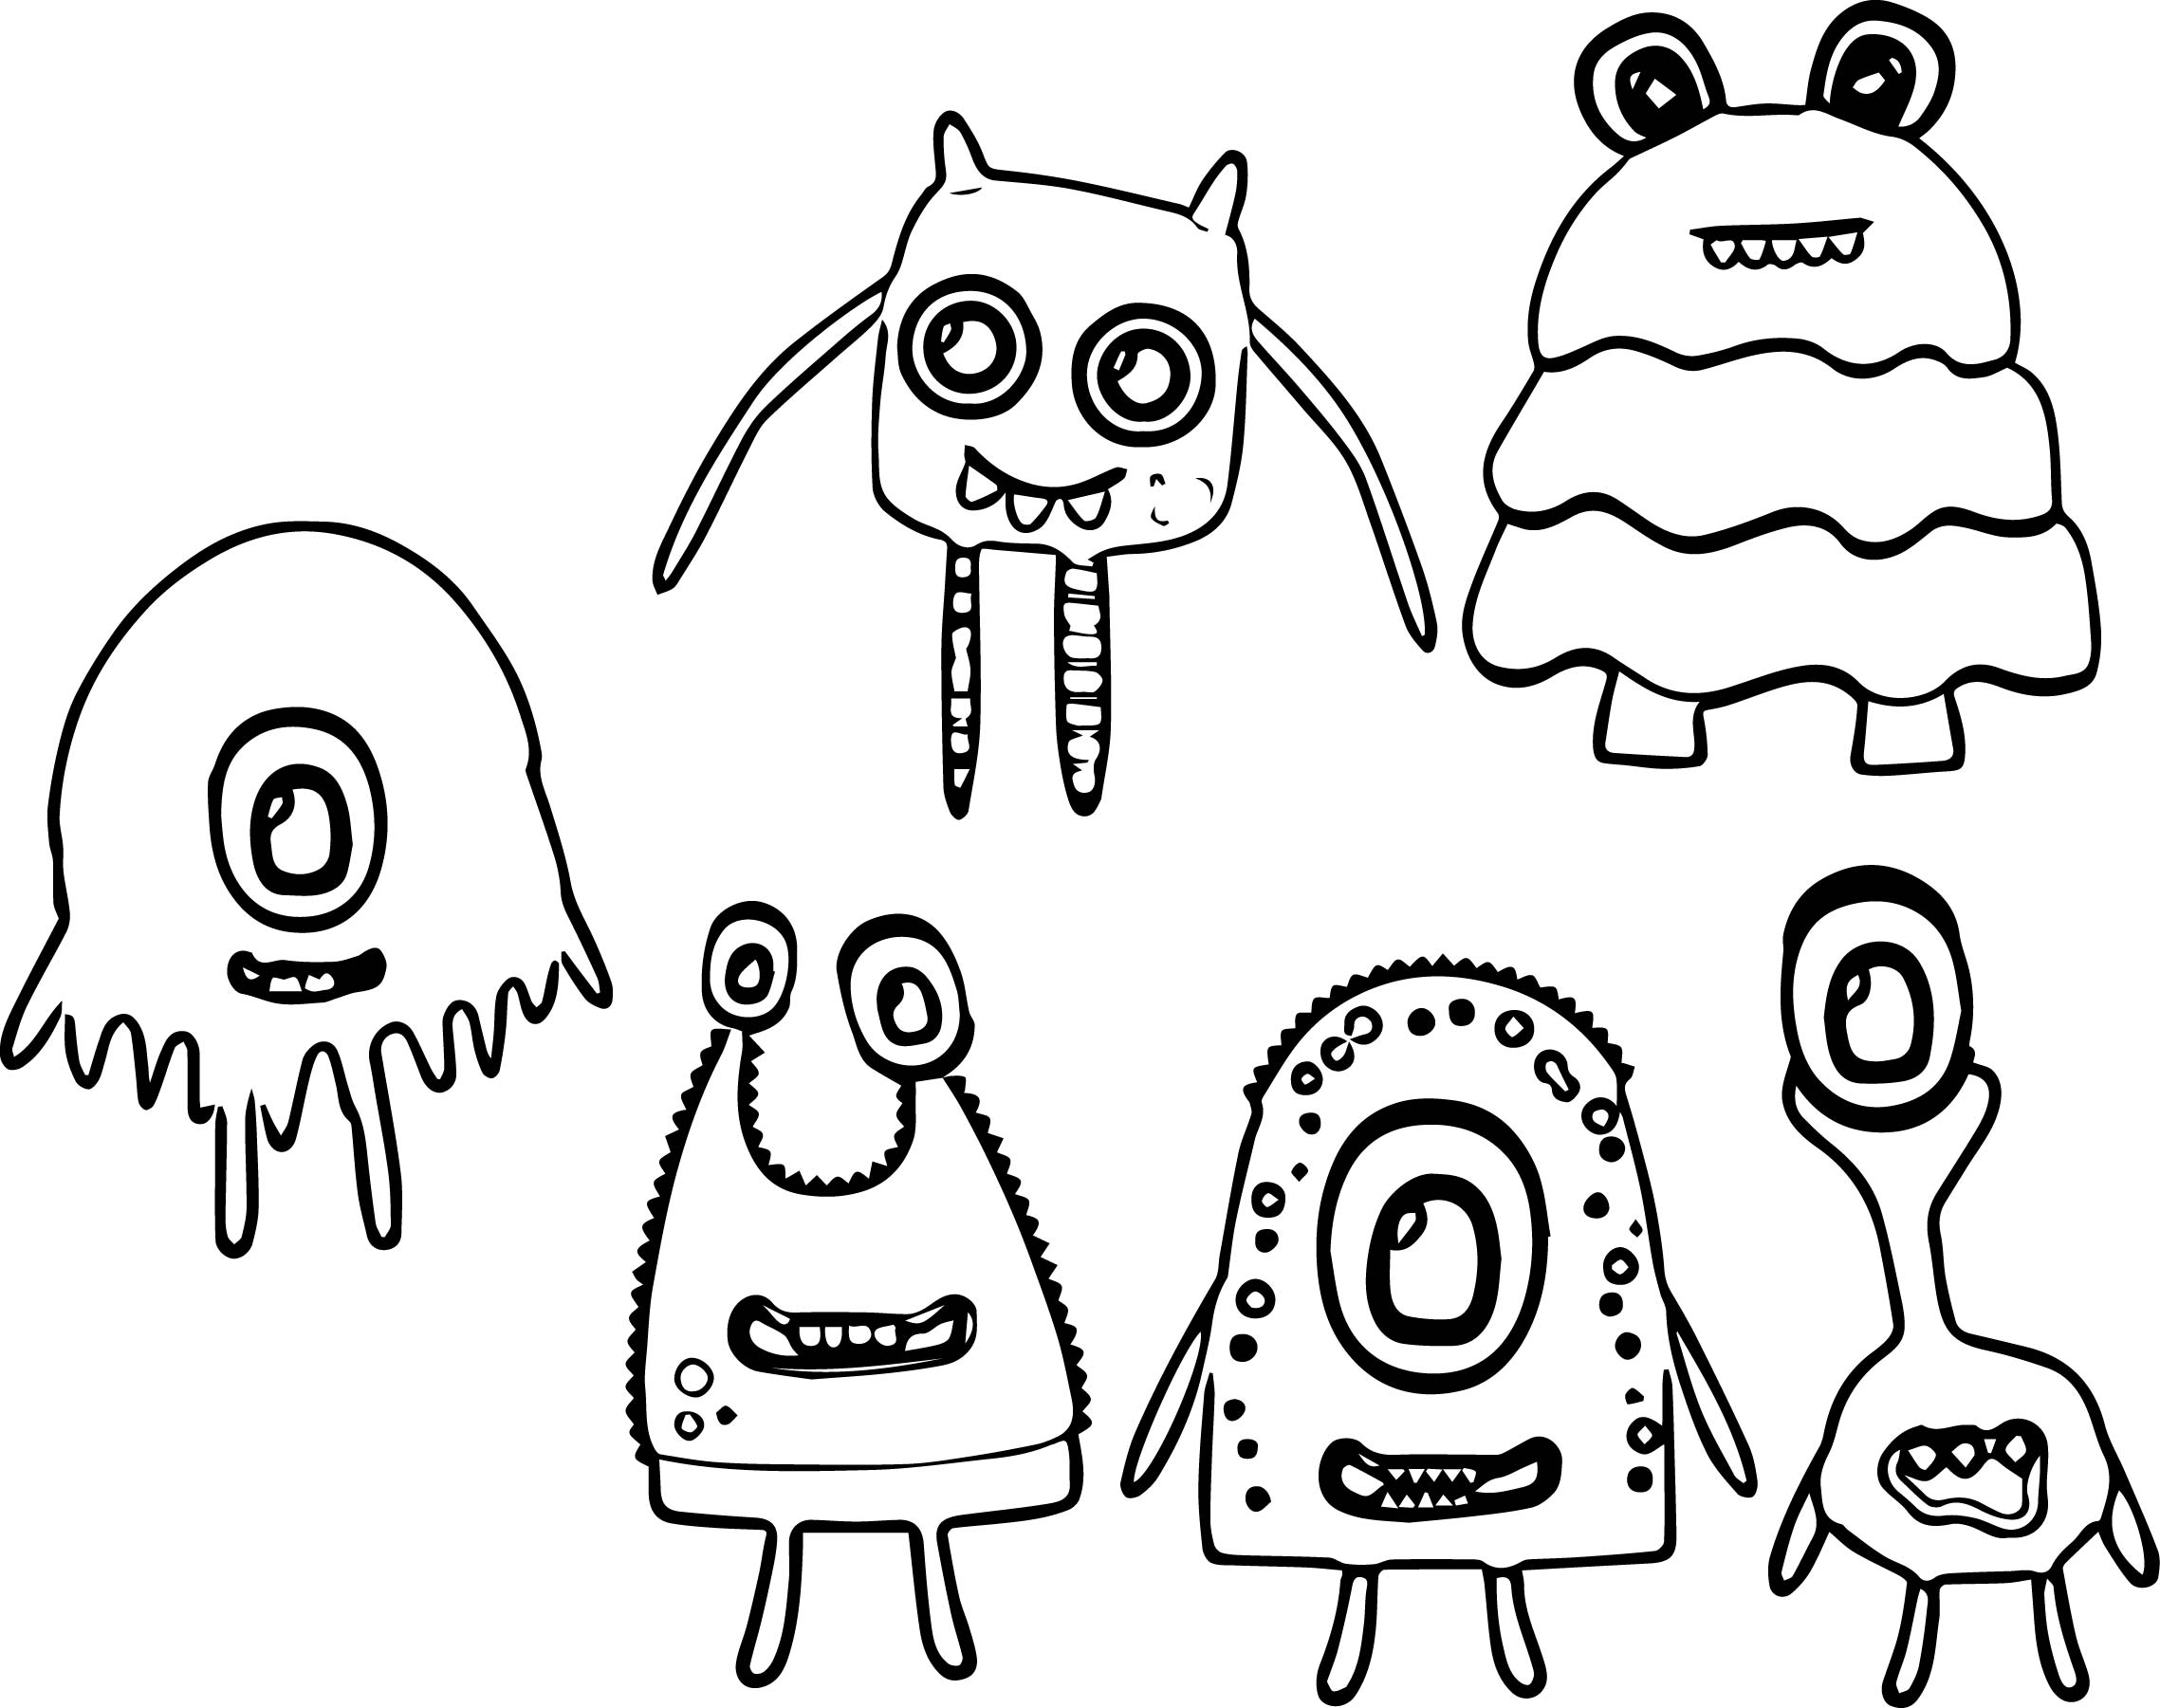 All Monster Alien Coloring Page Wecoloringpagecom